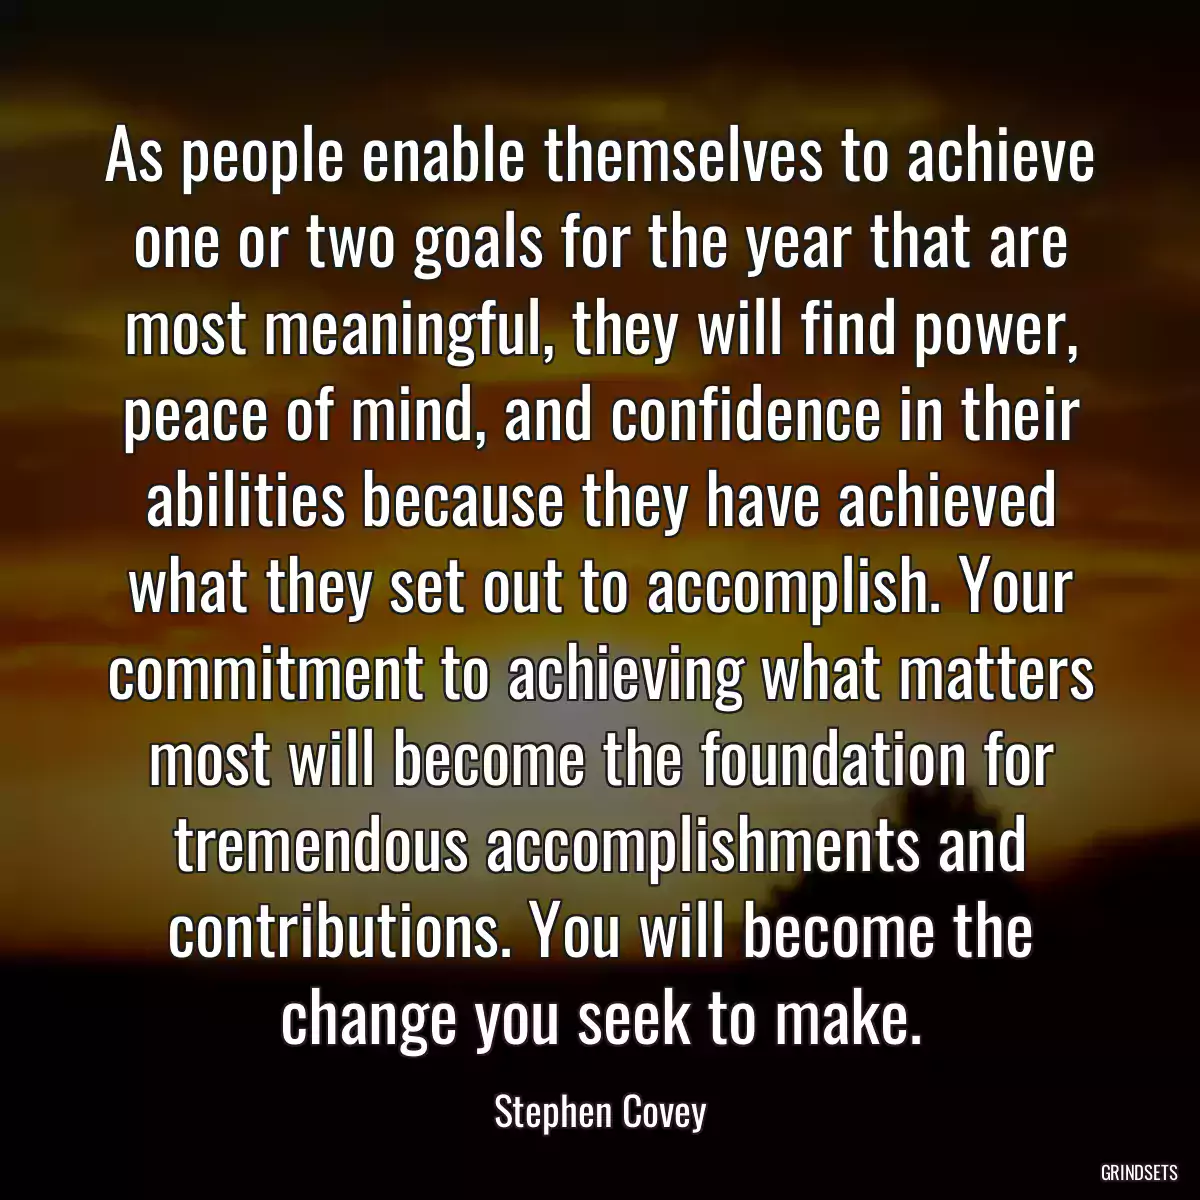 As people enable themselves to achieve one or two goals for the year that are most meaningful, they will find power, peace of mind, and confidence in their abilities because they have achieved what they set out to accomplish. Your commitment to achieving what matters most will become the foundation for tremendous accomplishments and contributions. You will become the change you seek to make.